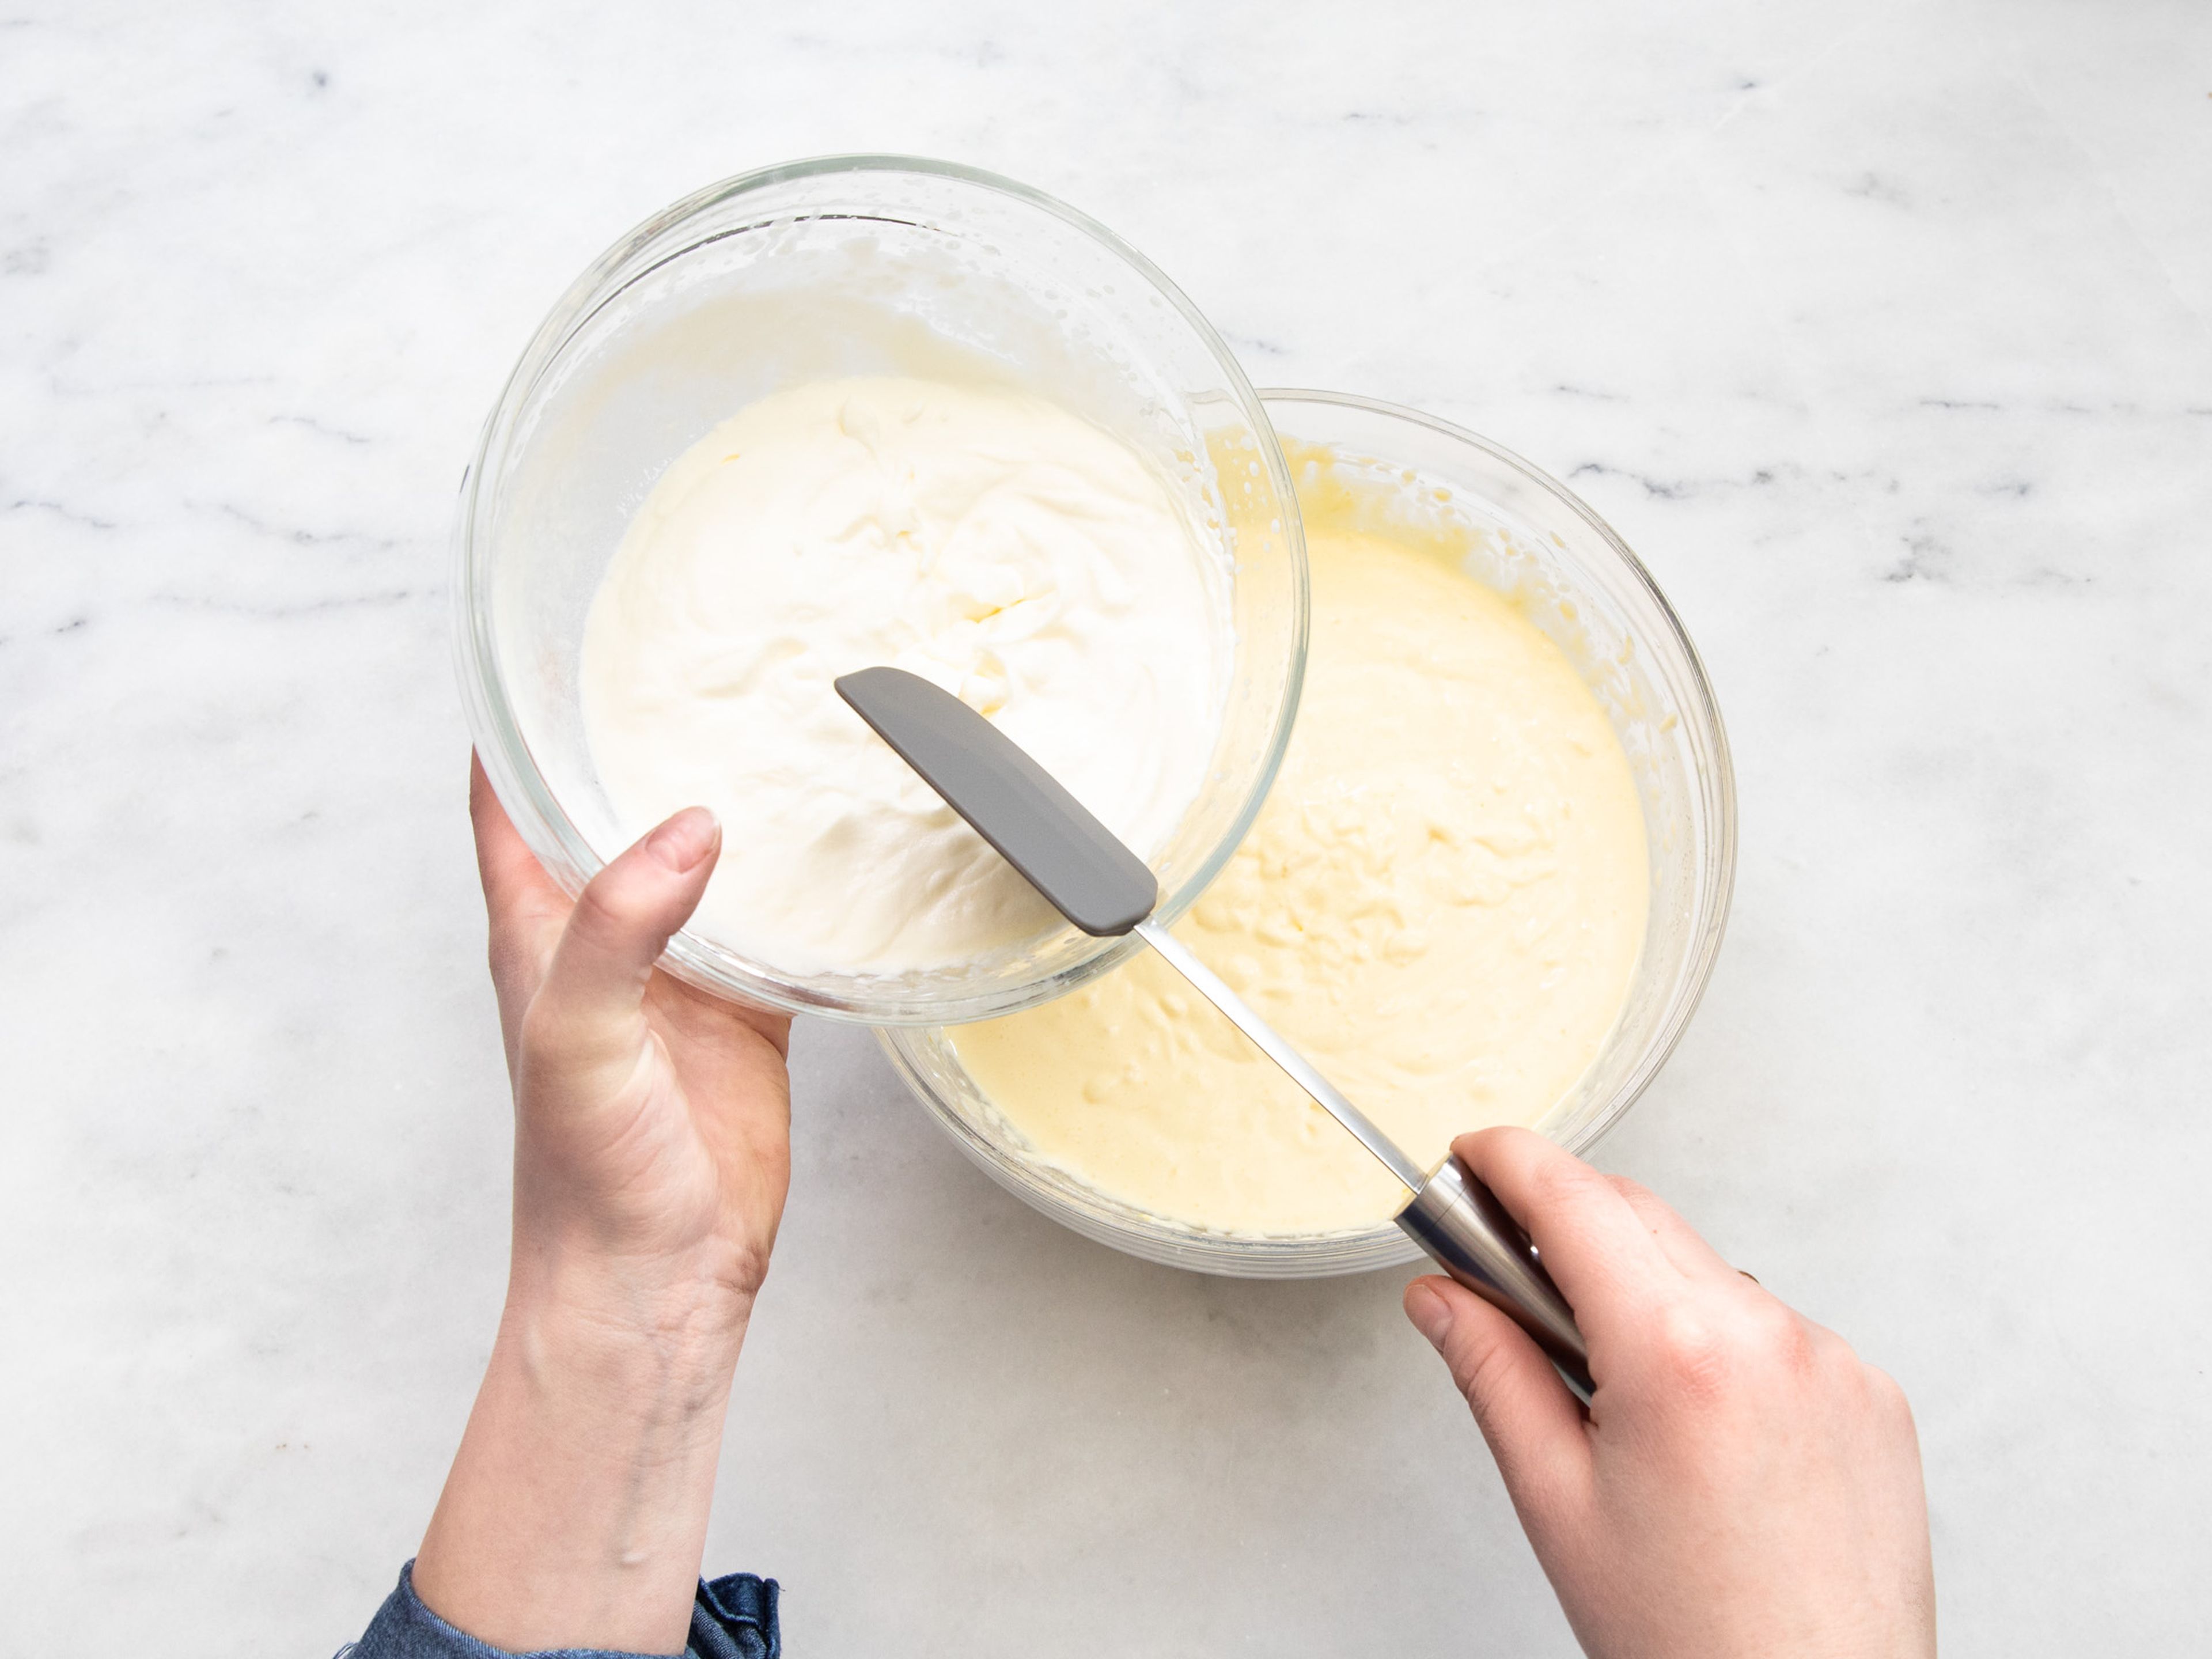 In a large bowl, beat the heavy cream until stiff and set aside. Mix in the egg yolks with quark, crème fraîche, vanilla extract, vanilla pudding powder, starch, lemon zest, lemon juice, and remaining sugar. Carefully fold in the beaten egg whites and whipped cream.